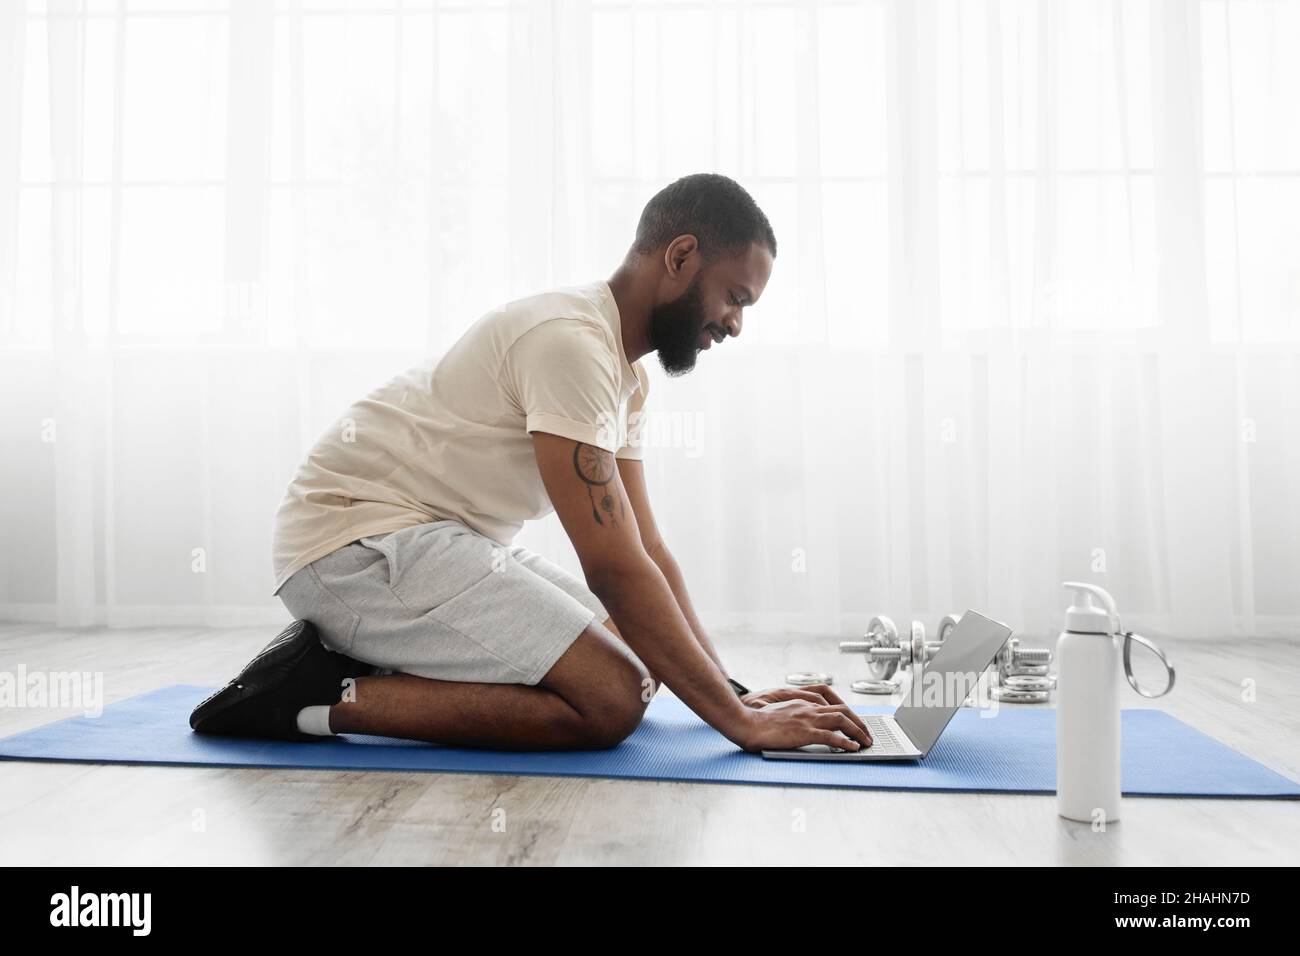 https://c8.alamy.com/comp/2HAHN7D/smiling-young-black-bearded-man-sit-on-mat-on-floor-in-room-with-dumbbells-bottle-of-water-watch-workout-2HAHN7D.jpg